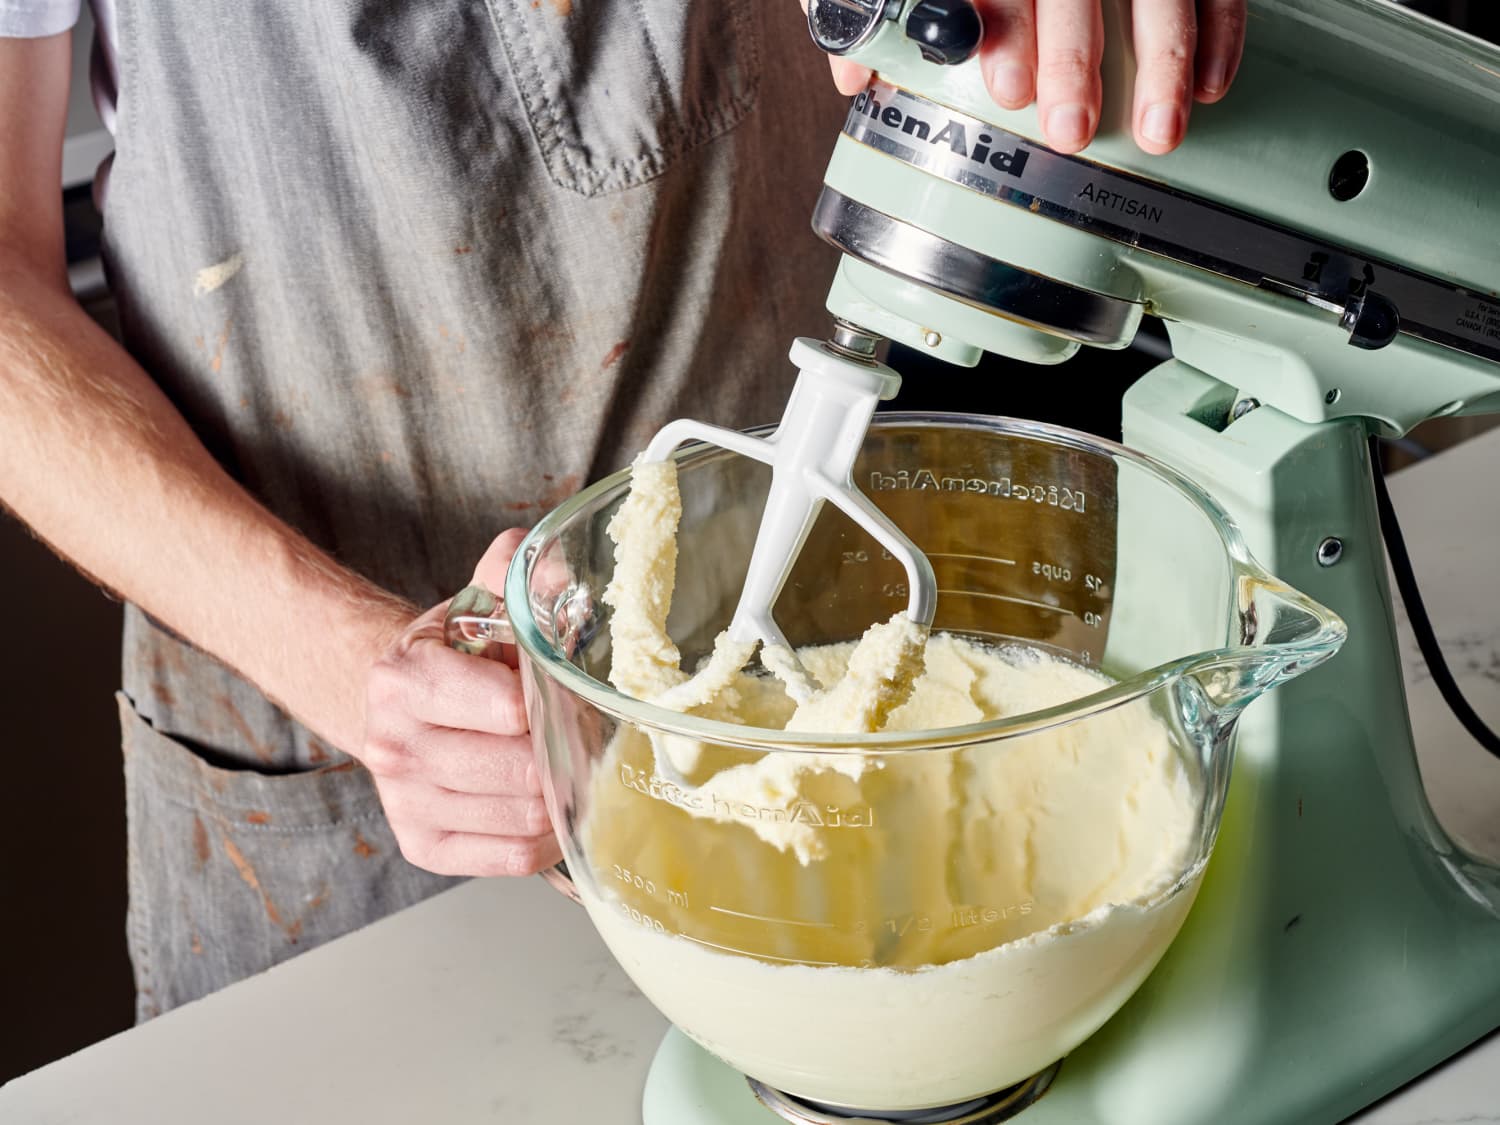 How to Store Your Stand Mixer